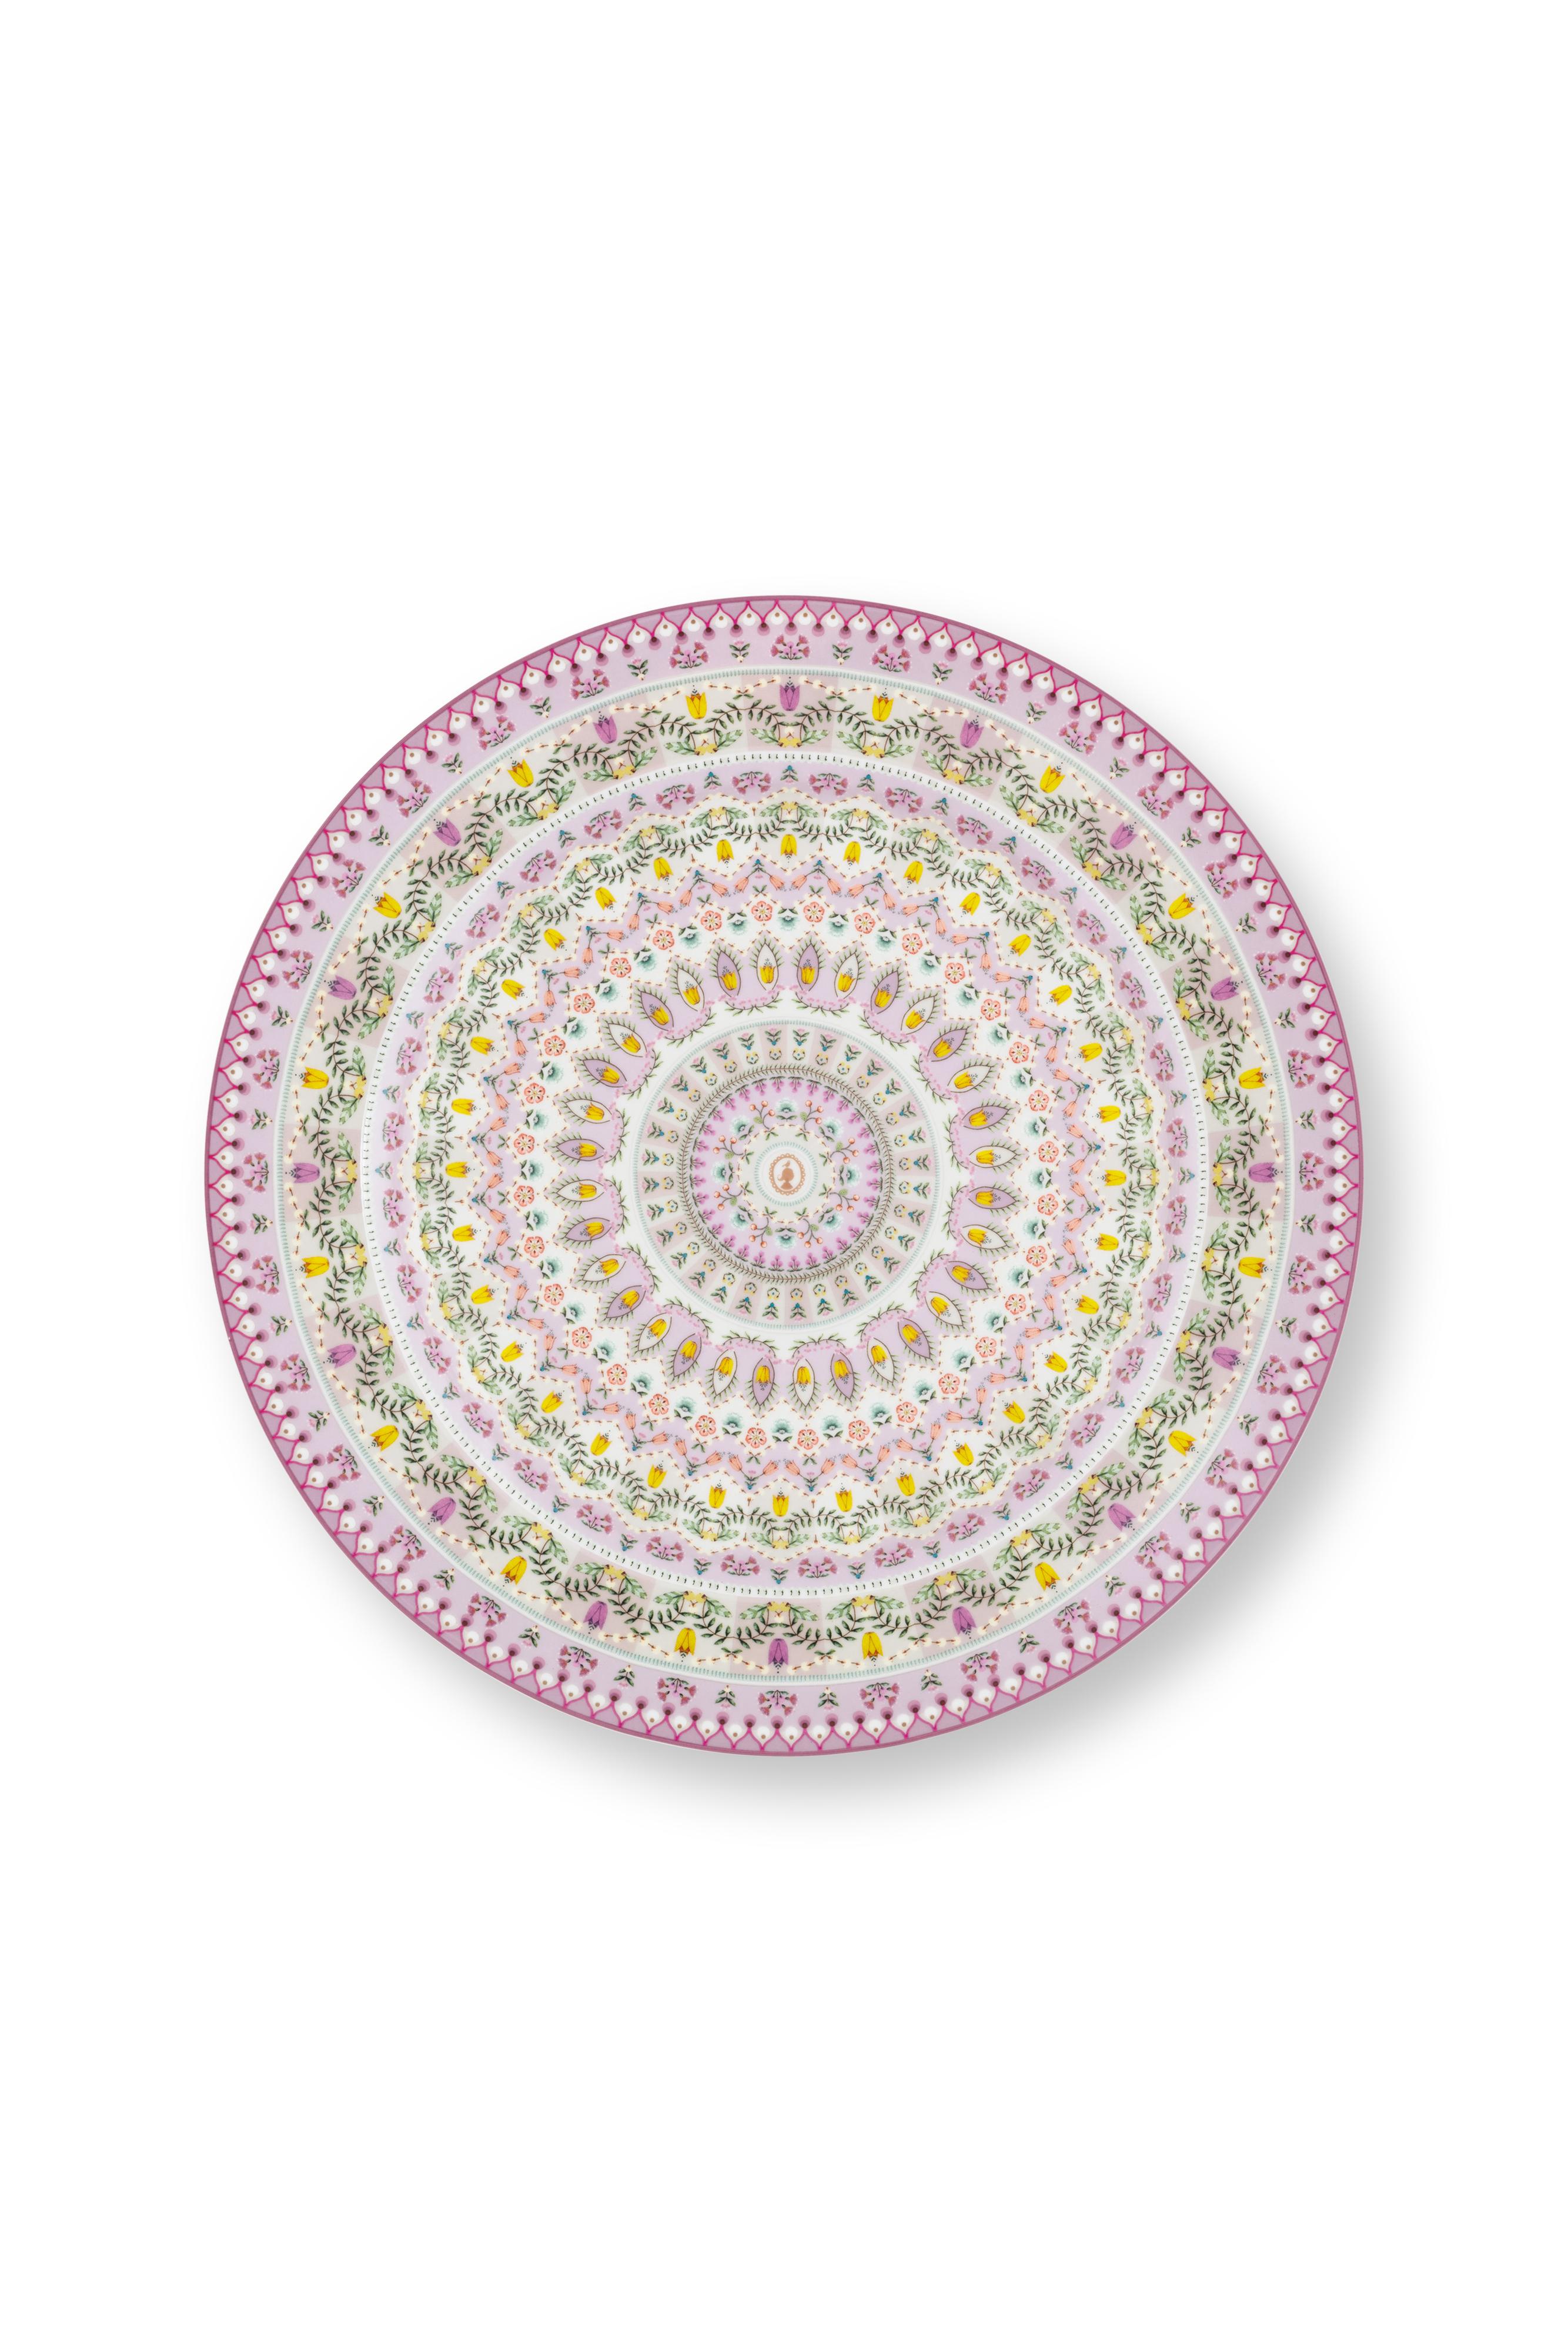 Plate Lily-lotus Moon Delight Multi 32cm Gift